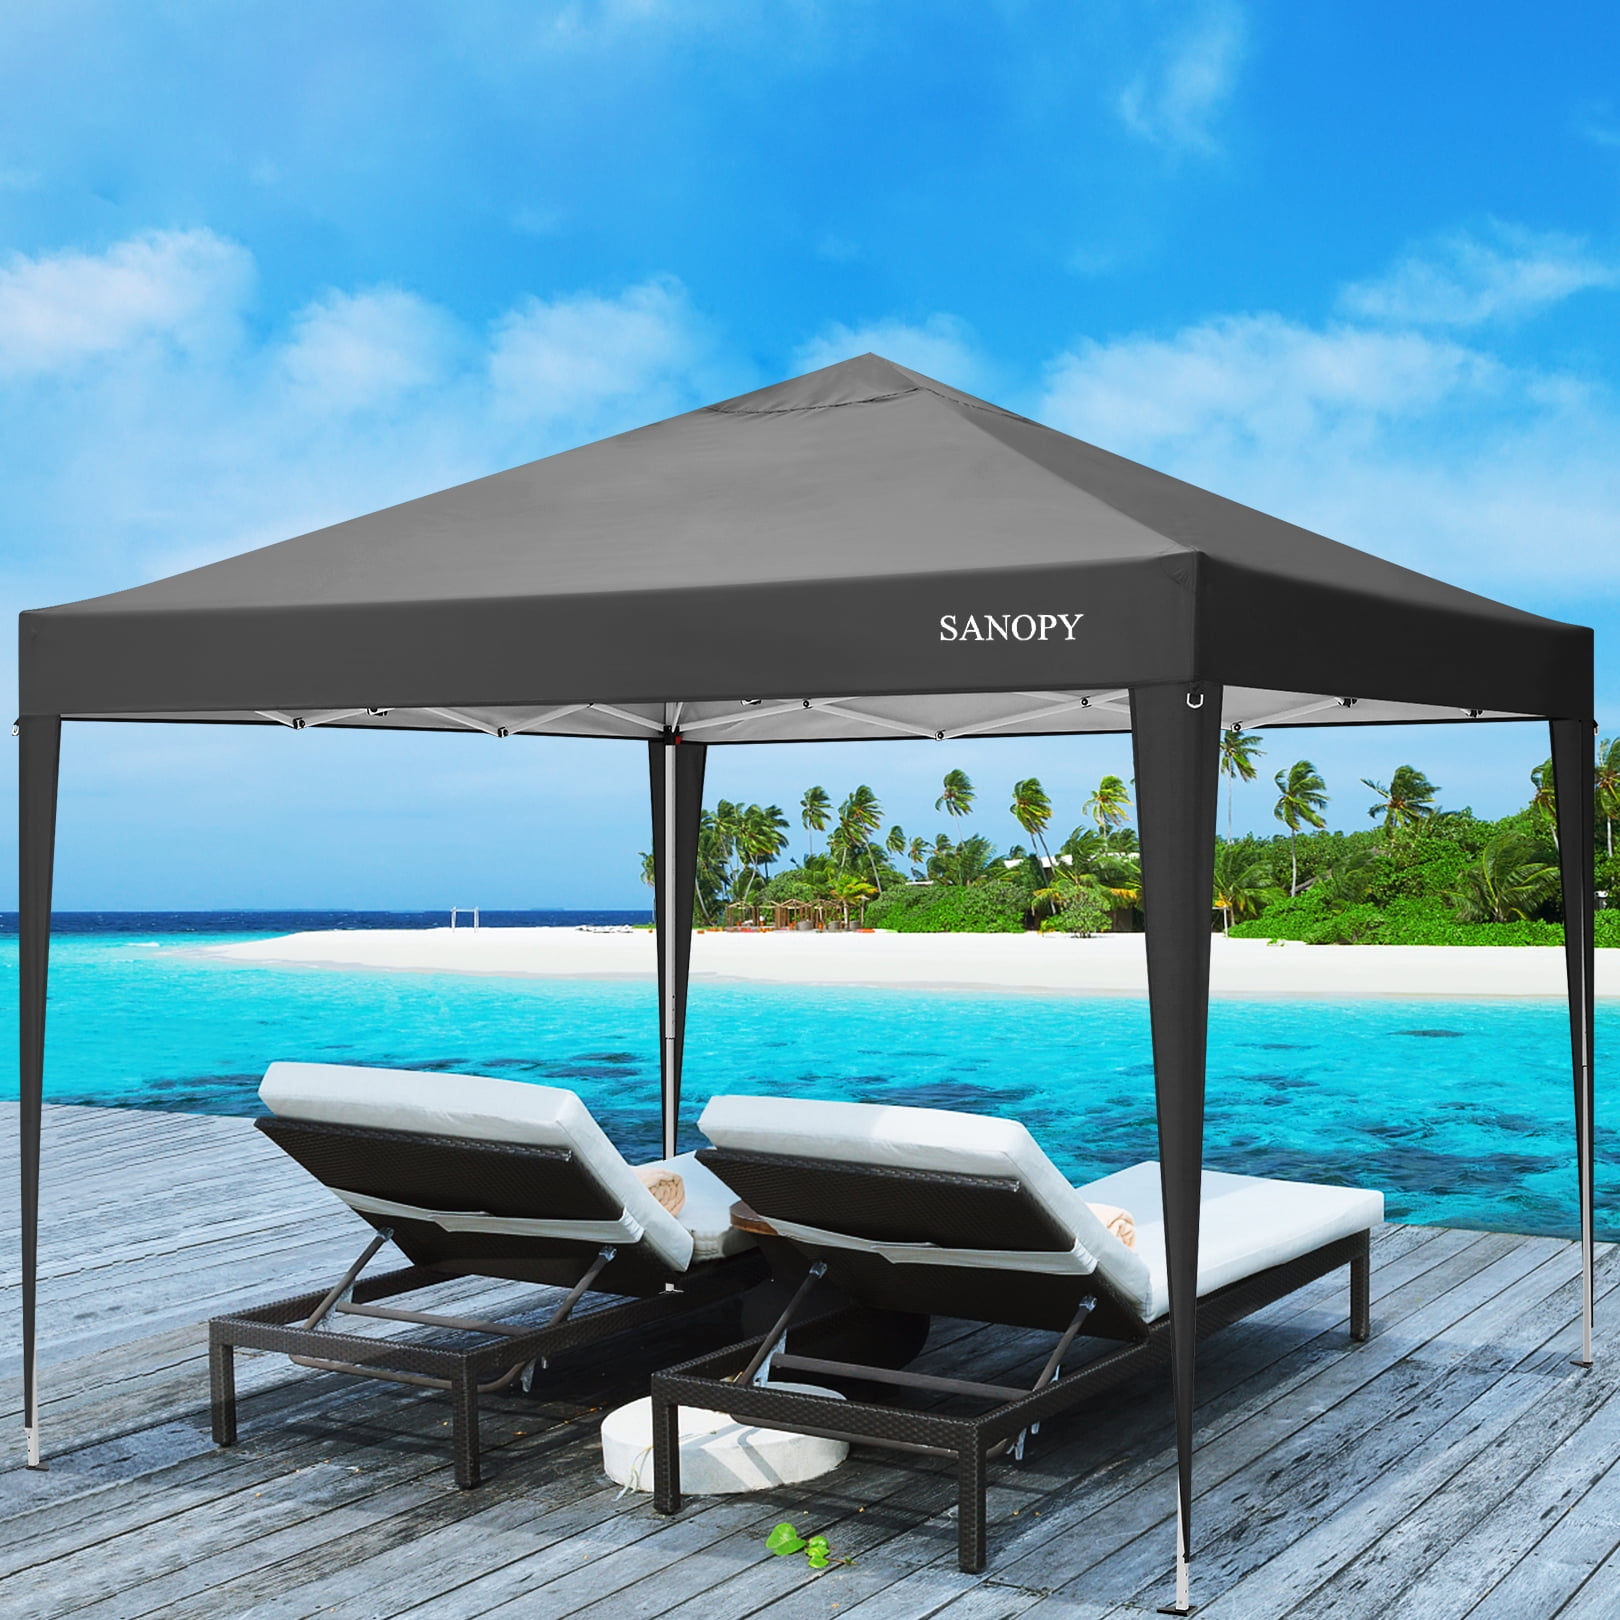 SANOPY 10'x10' EZ Pop Up Canopy Tent Outdoor Party Instant Shelter Portable Folding Beach Canopy with 4 Sandbag & Carrying Bag, Black